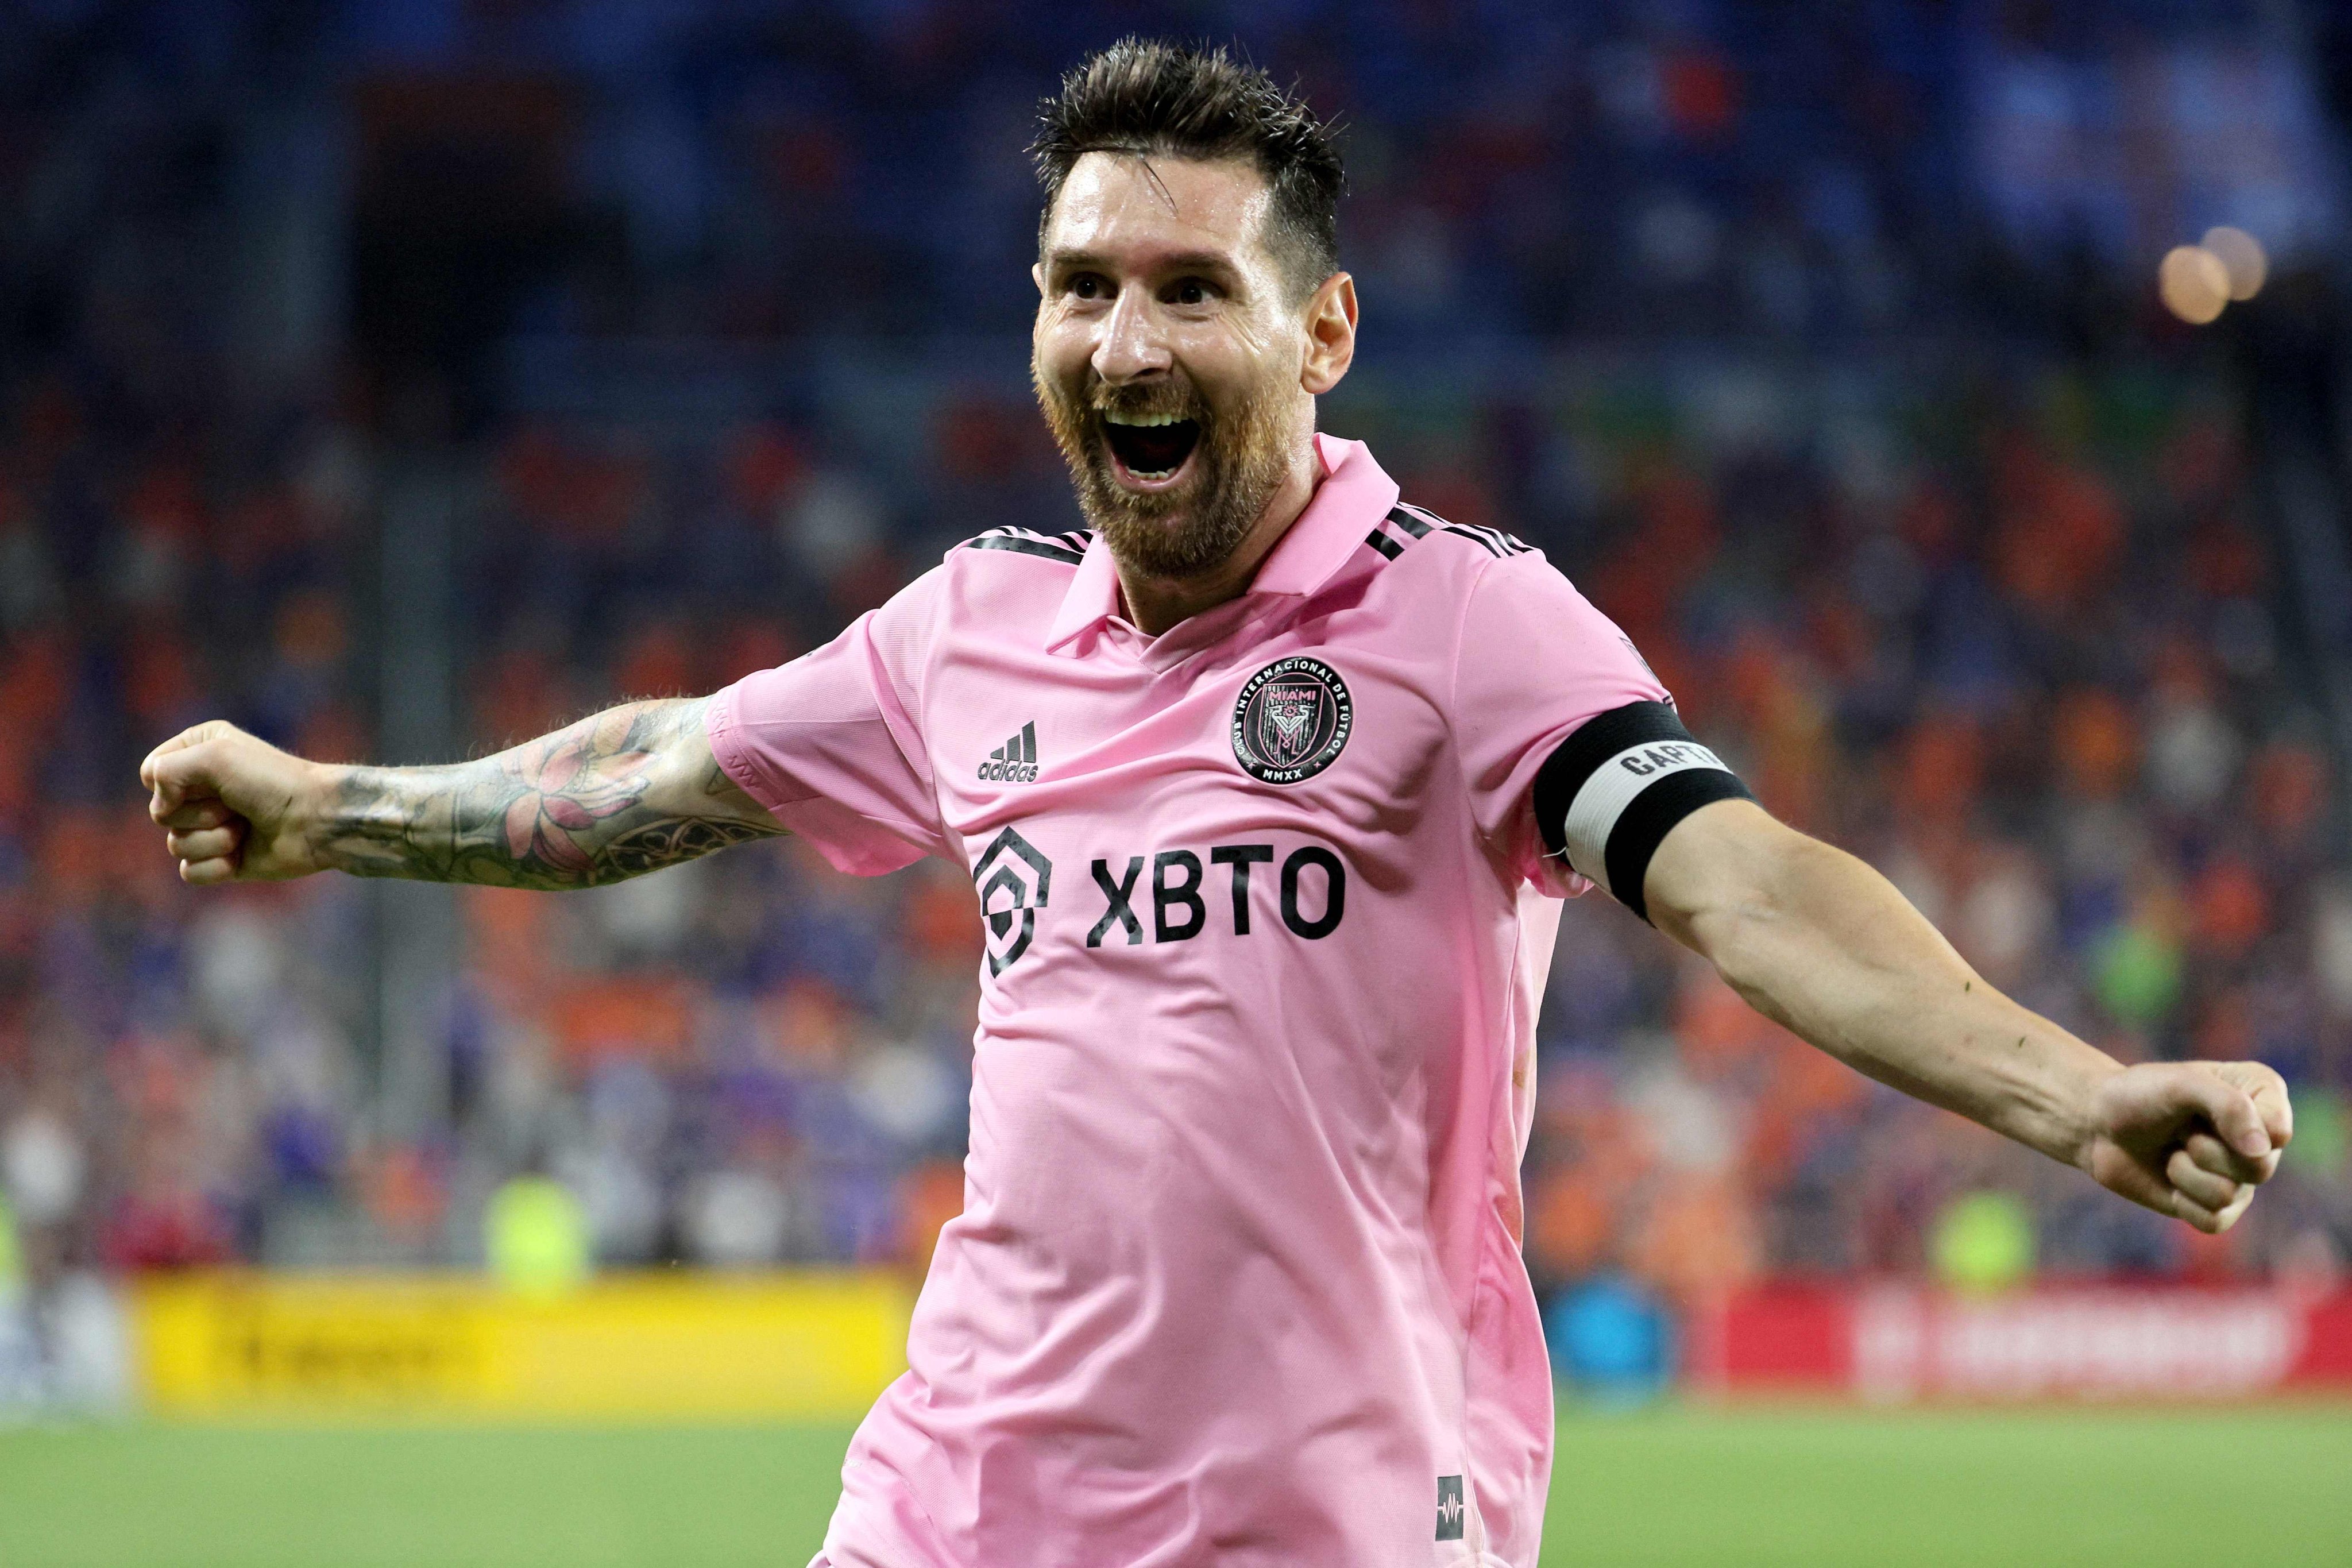 Lionel Messi’s American club Inter Miami have confirmed they are to play in China. Photo: Getty Images via AFP